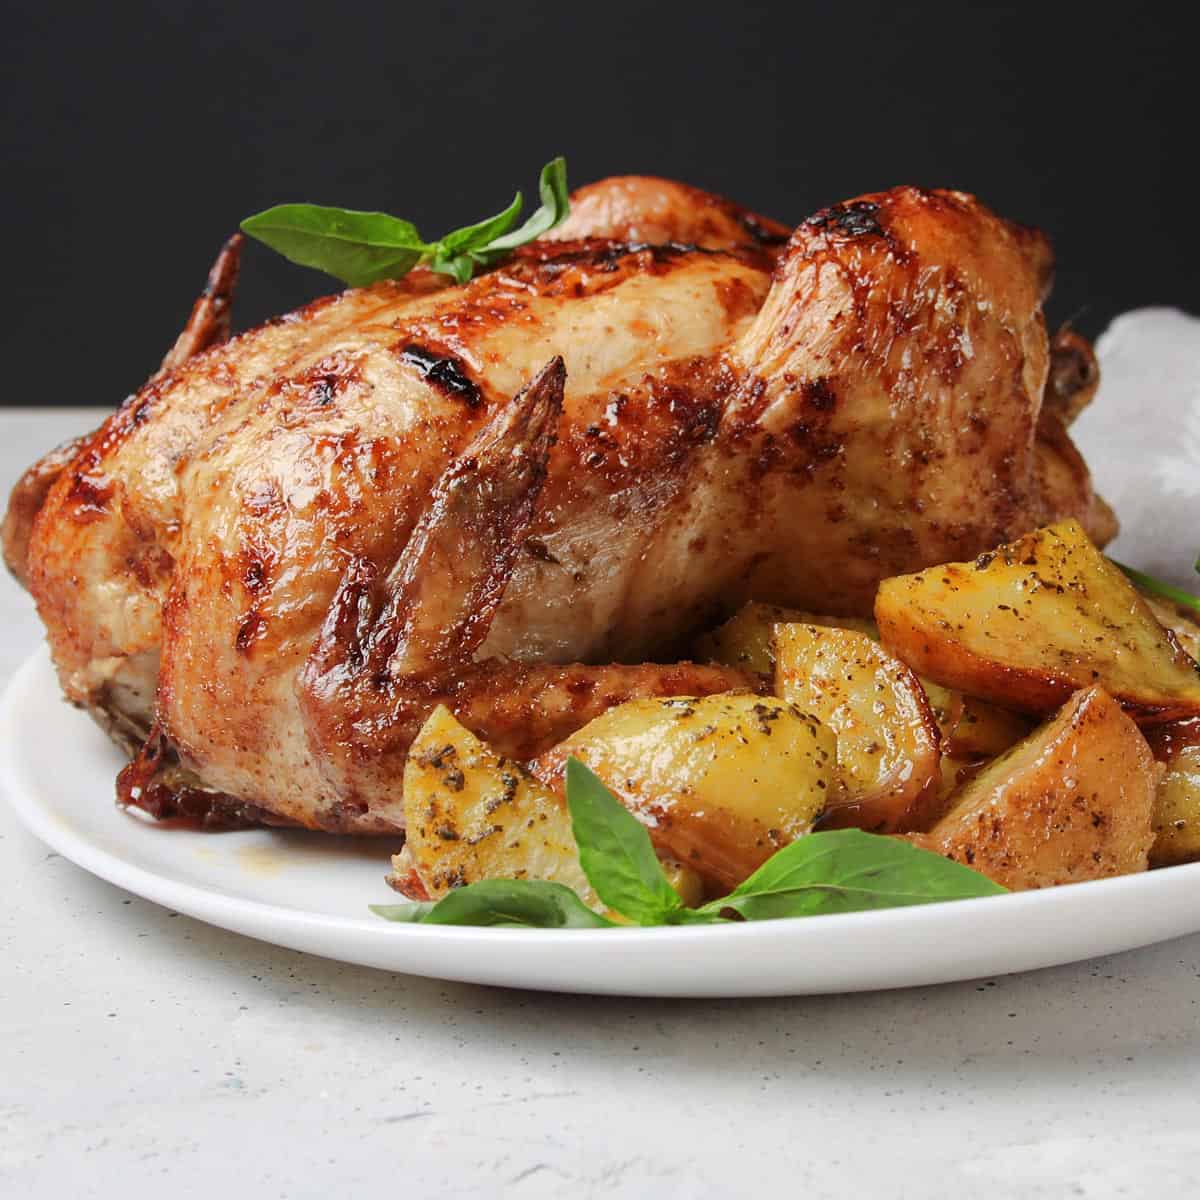 A roasted chicken on a plate with some crispy potatoes.